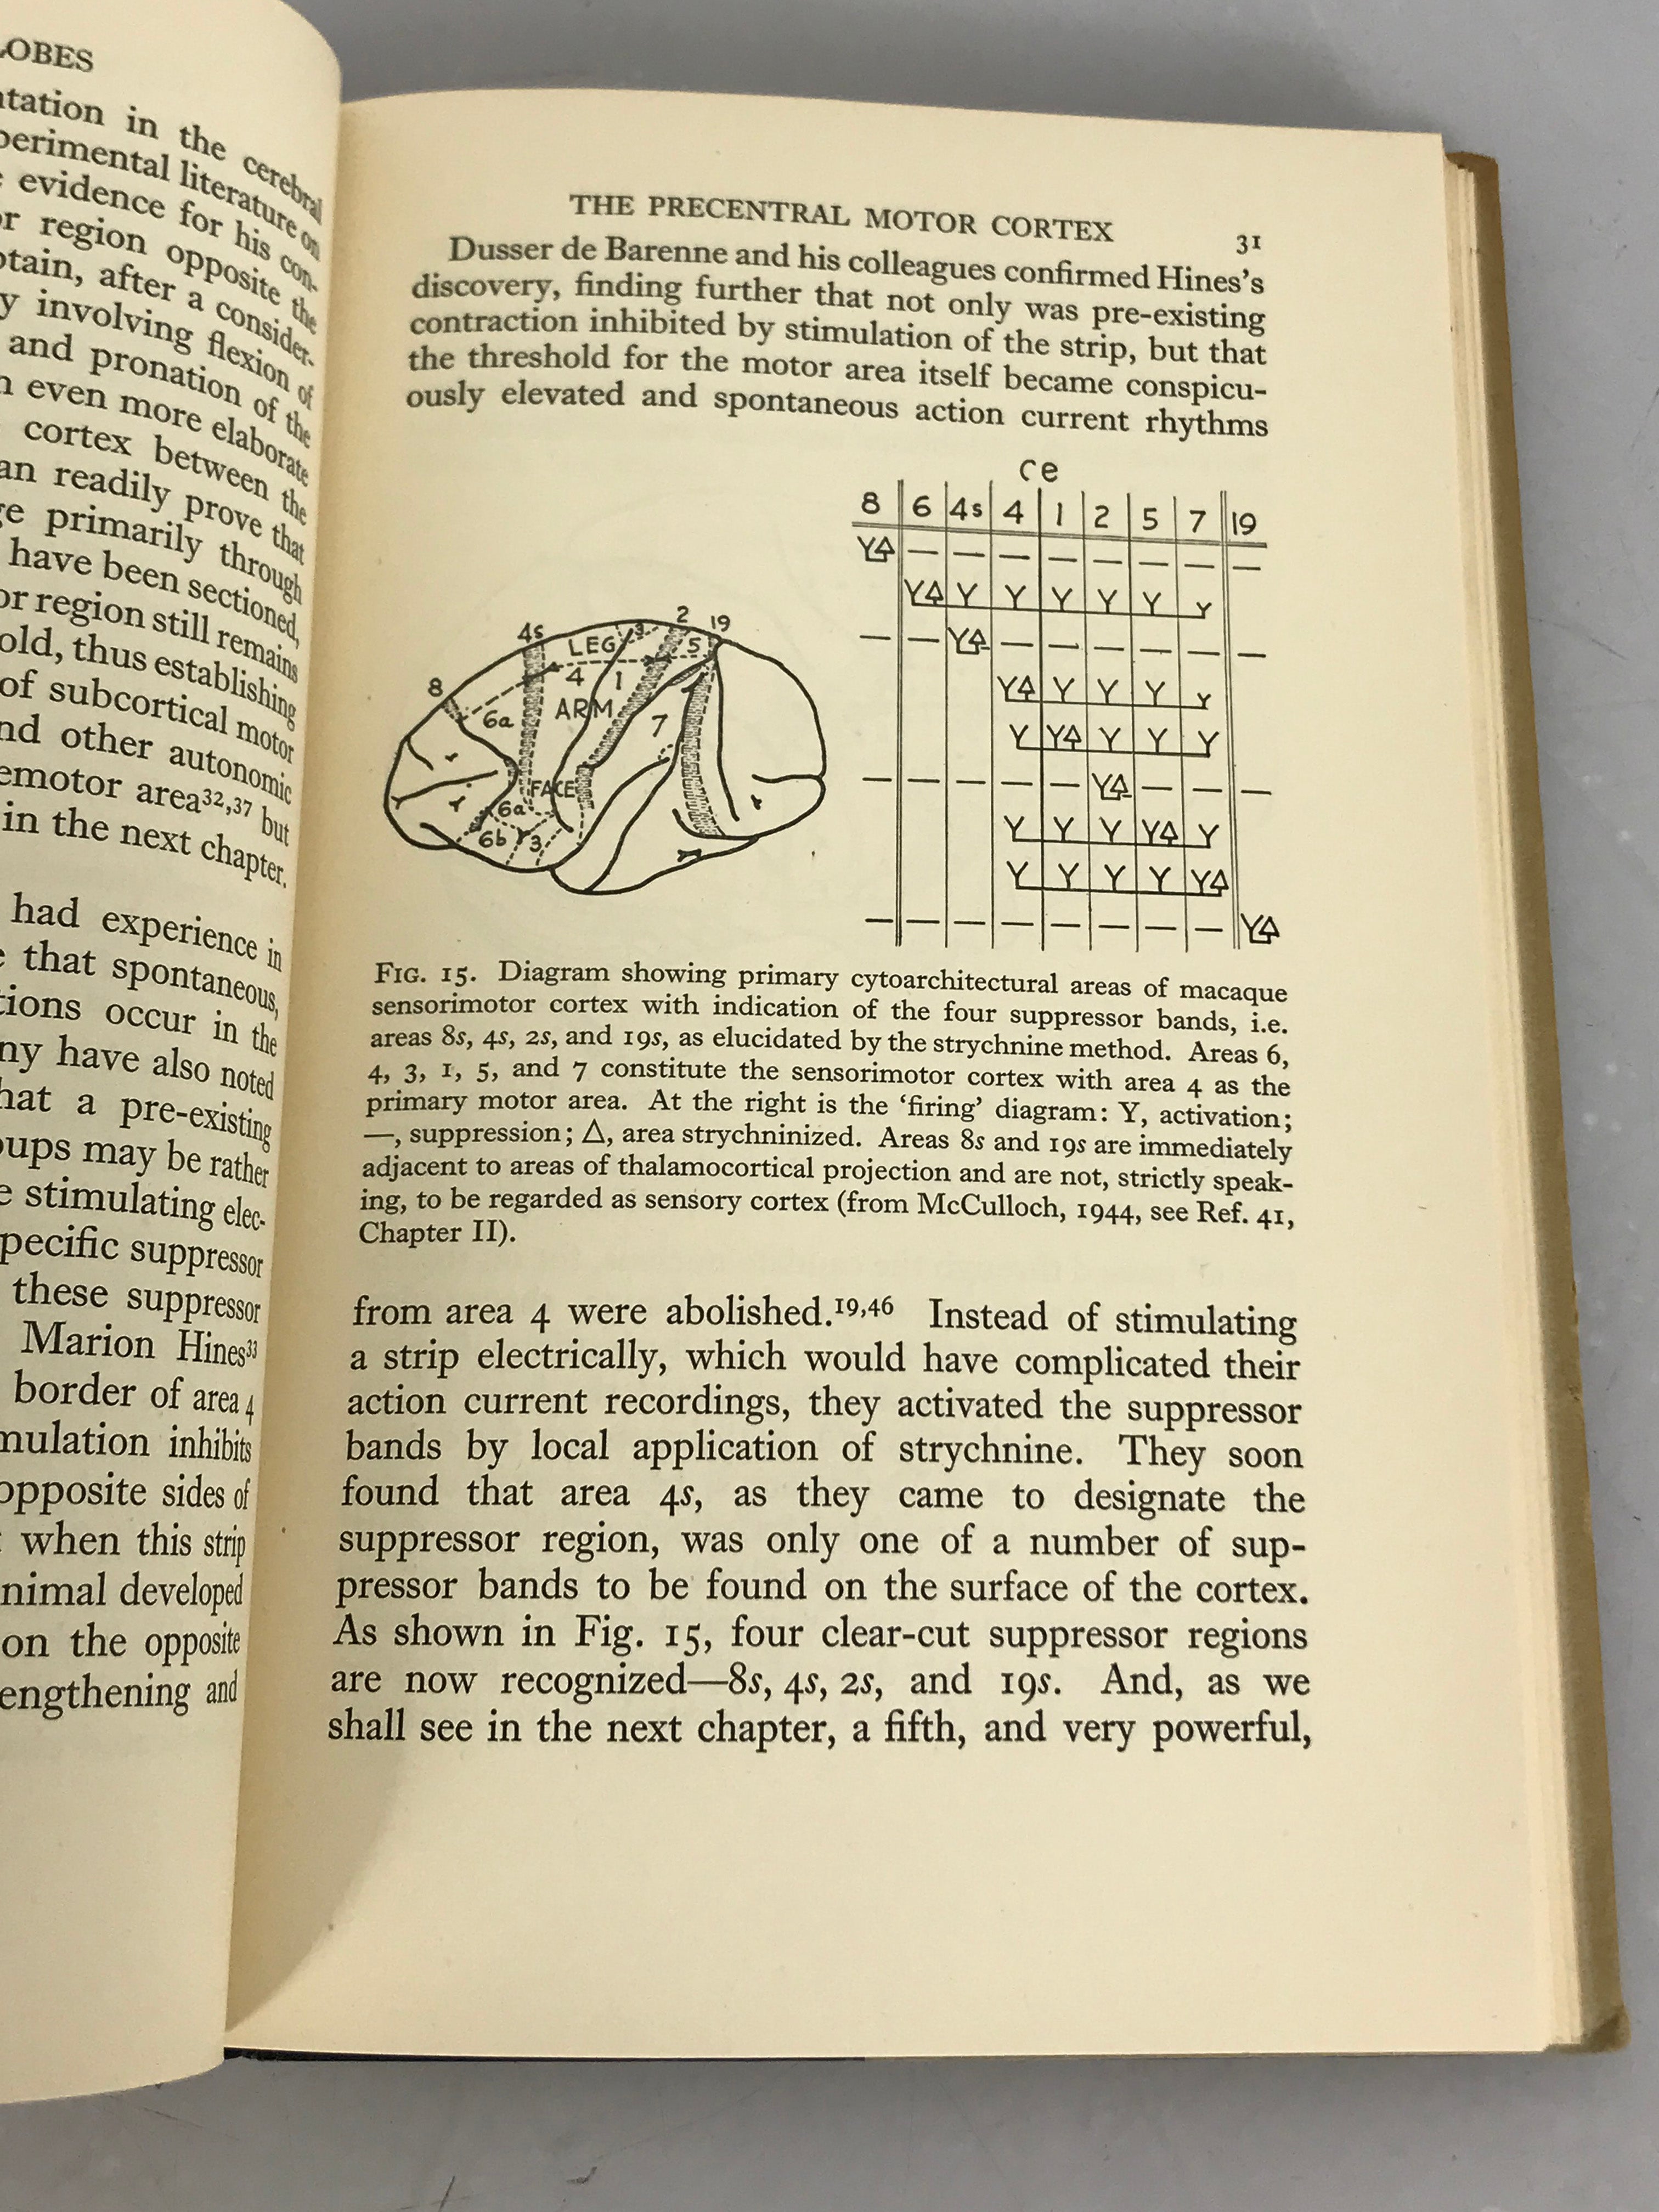 Functional Localization in the Frontal Lobes and Cerebellum by John Fulton 1949 HC DJ